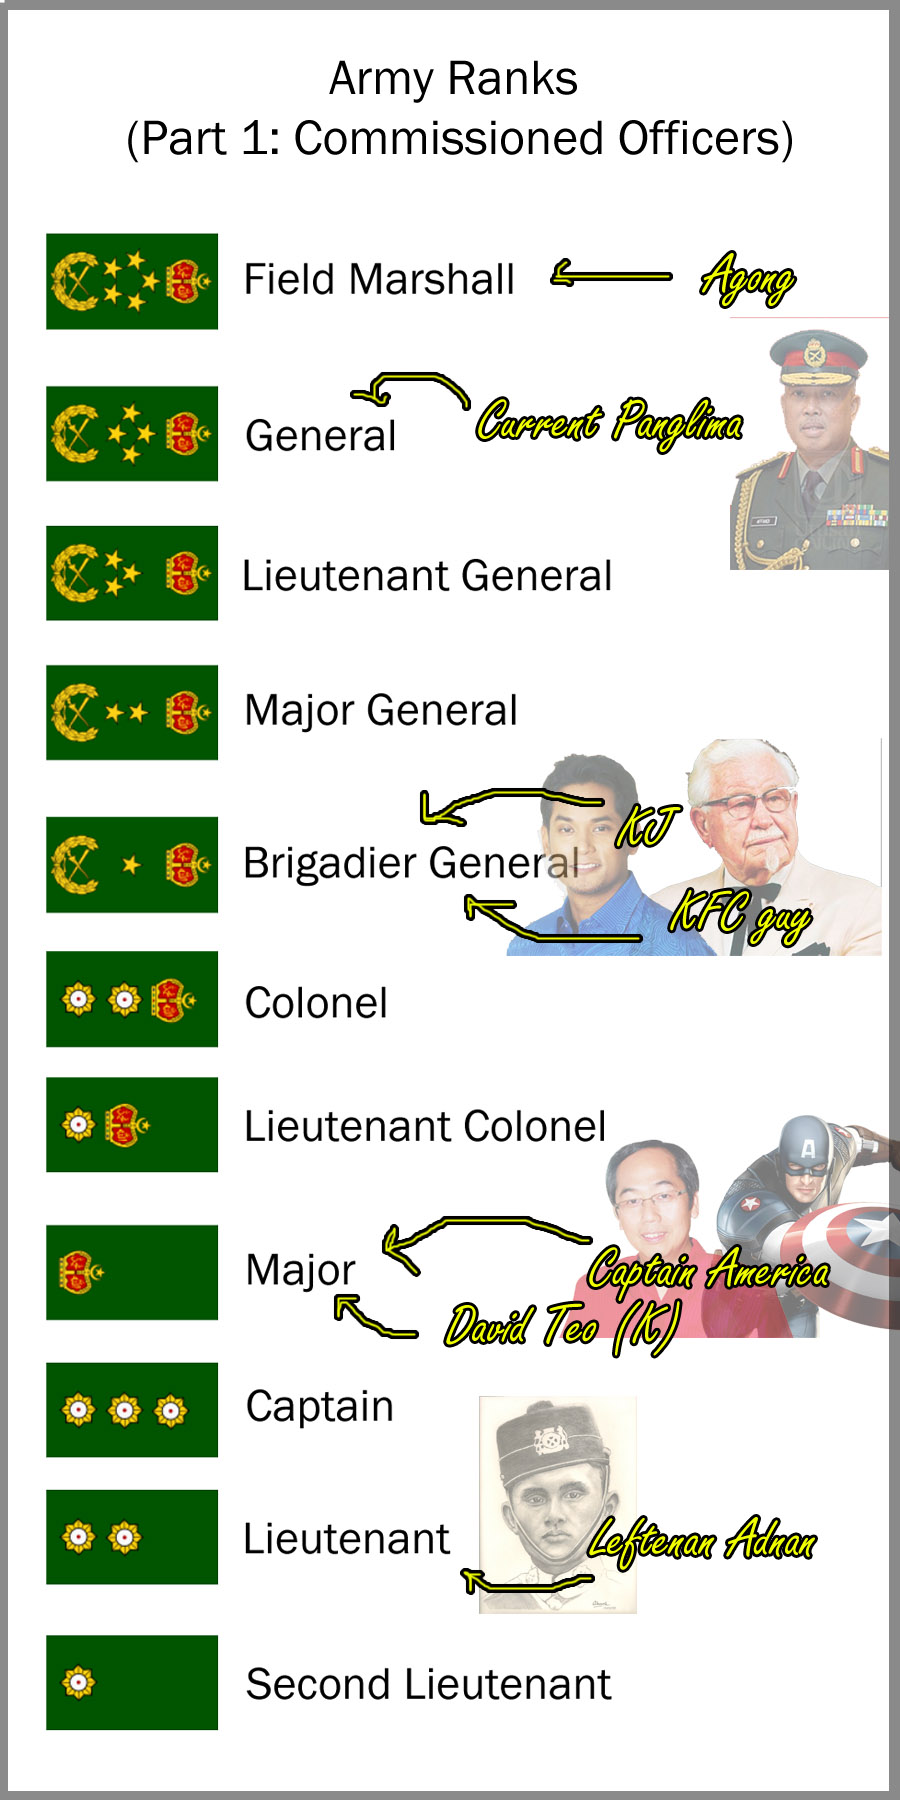 We don't know many famous Malaysian soldiers, so we adjusted the ranks of Captain America and Colonel Sanders to fit in the Malaysia scheme. Ranks from Wikipedia.